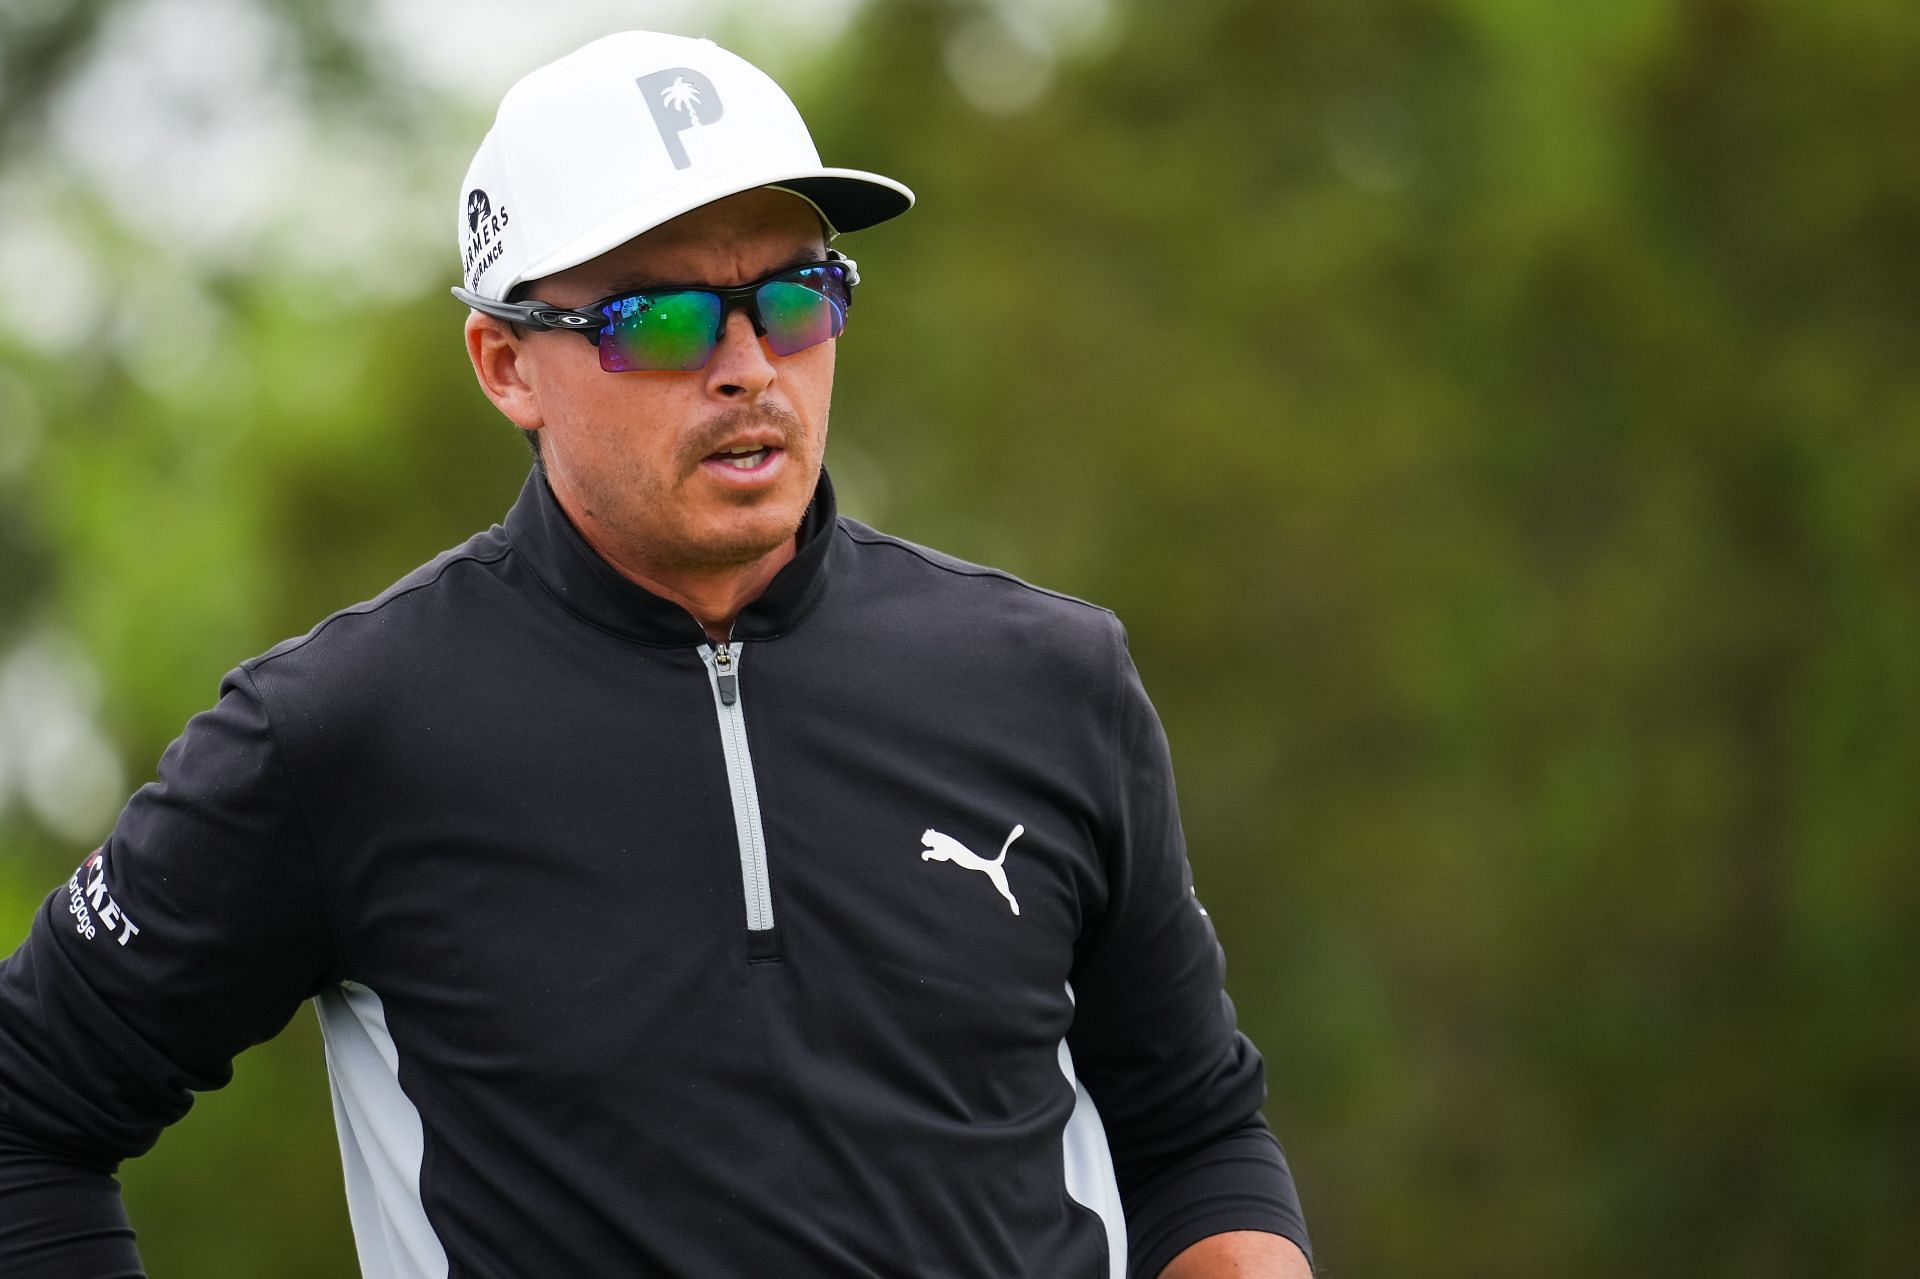 Rickie Fowler finished T-10 in the 2023 Valero Texas Open